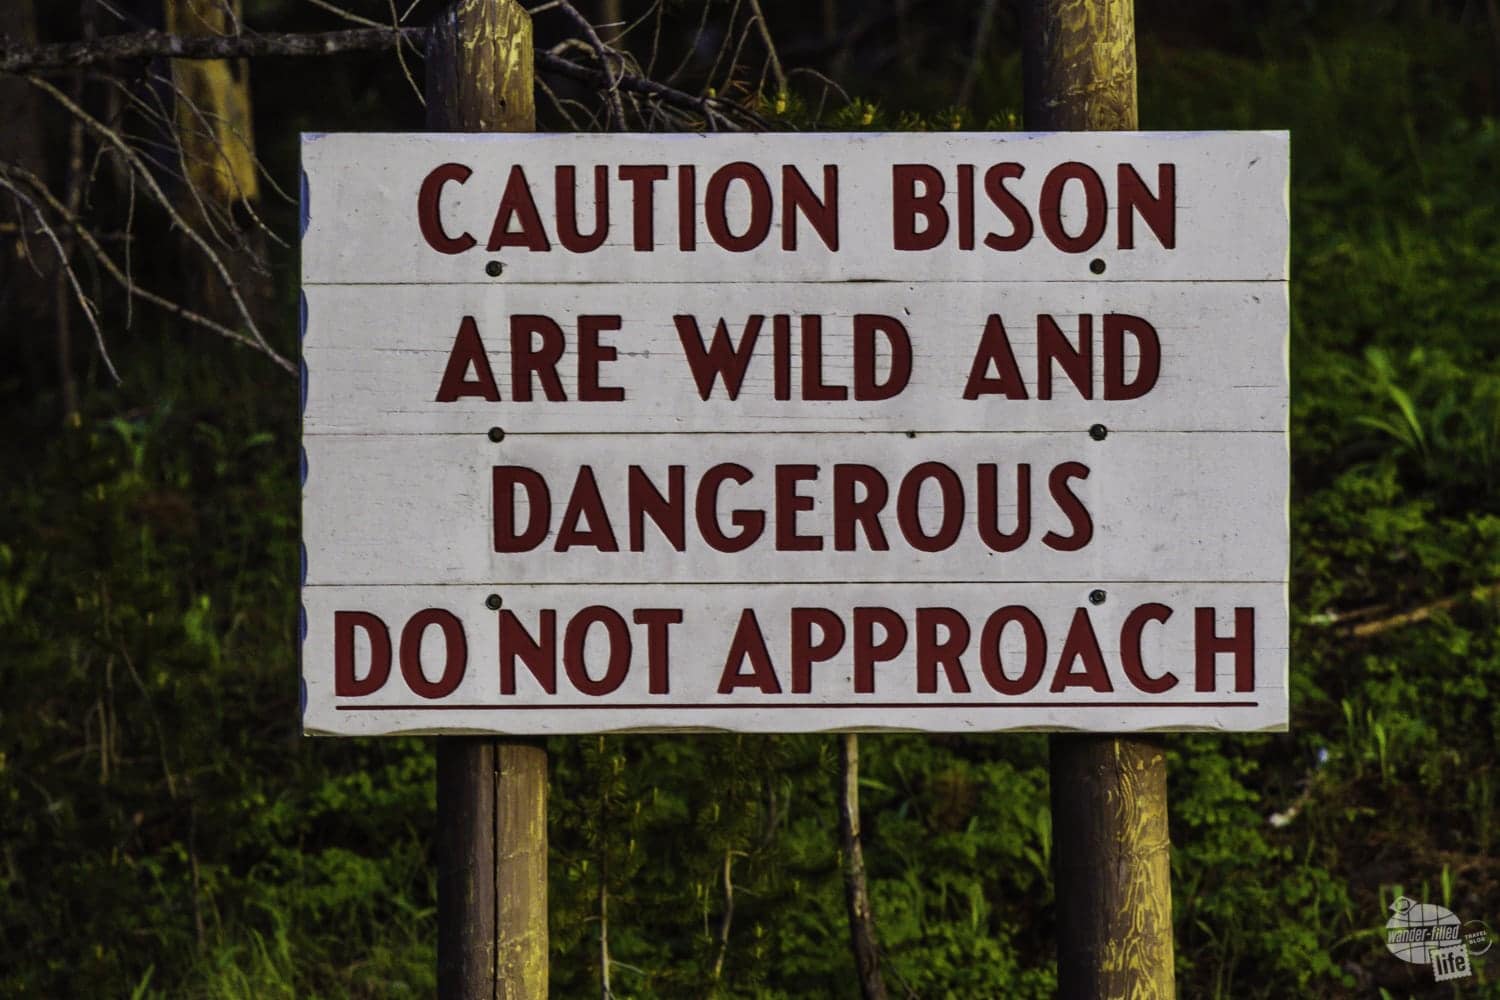 Yellowstone signs remind you to be careful with wildlife.